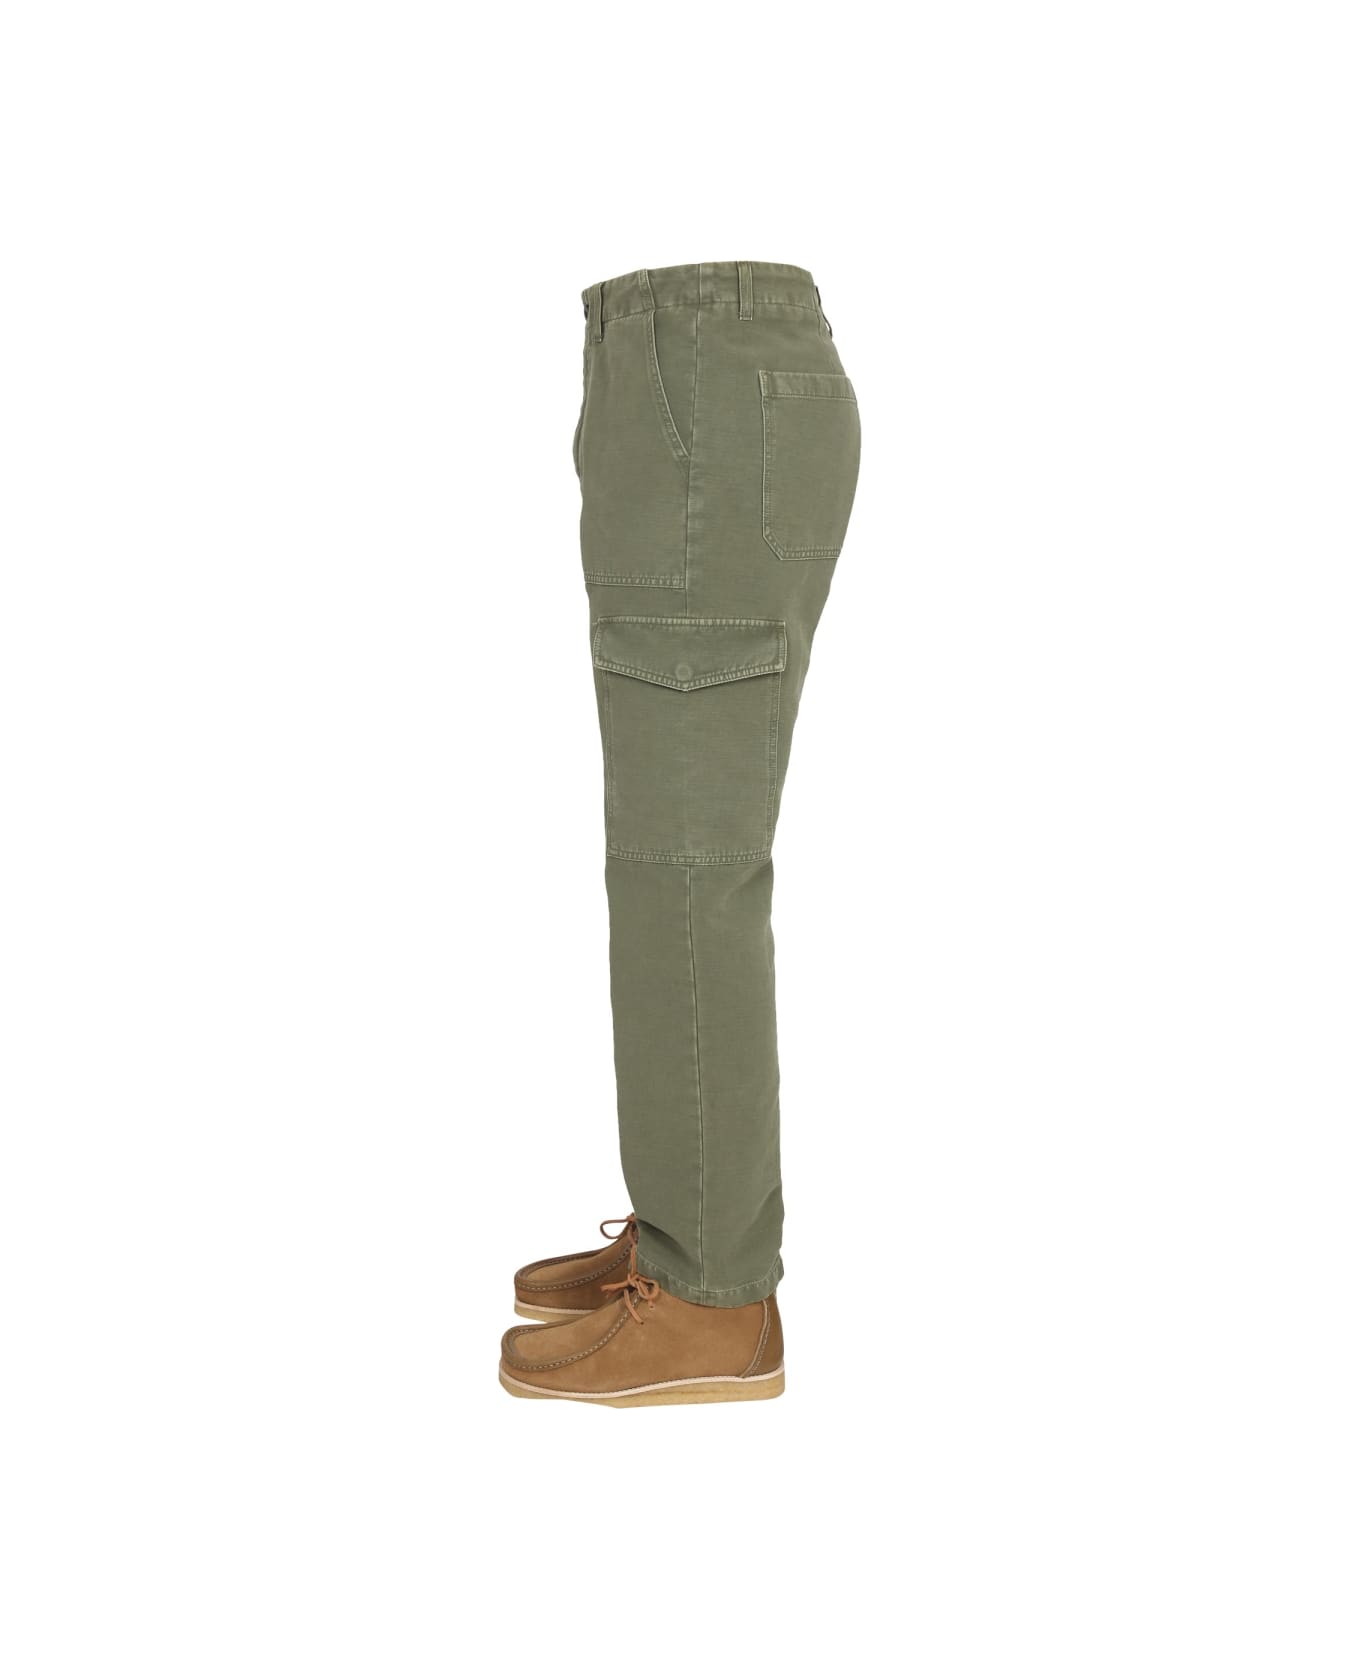 Department Five Pants Out - GREEN